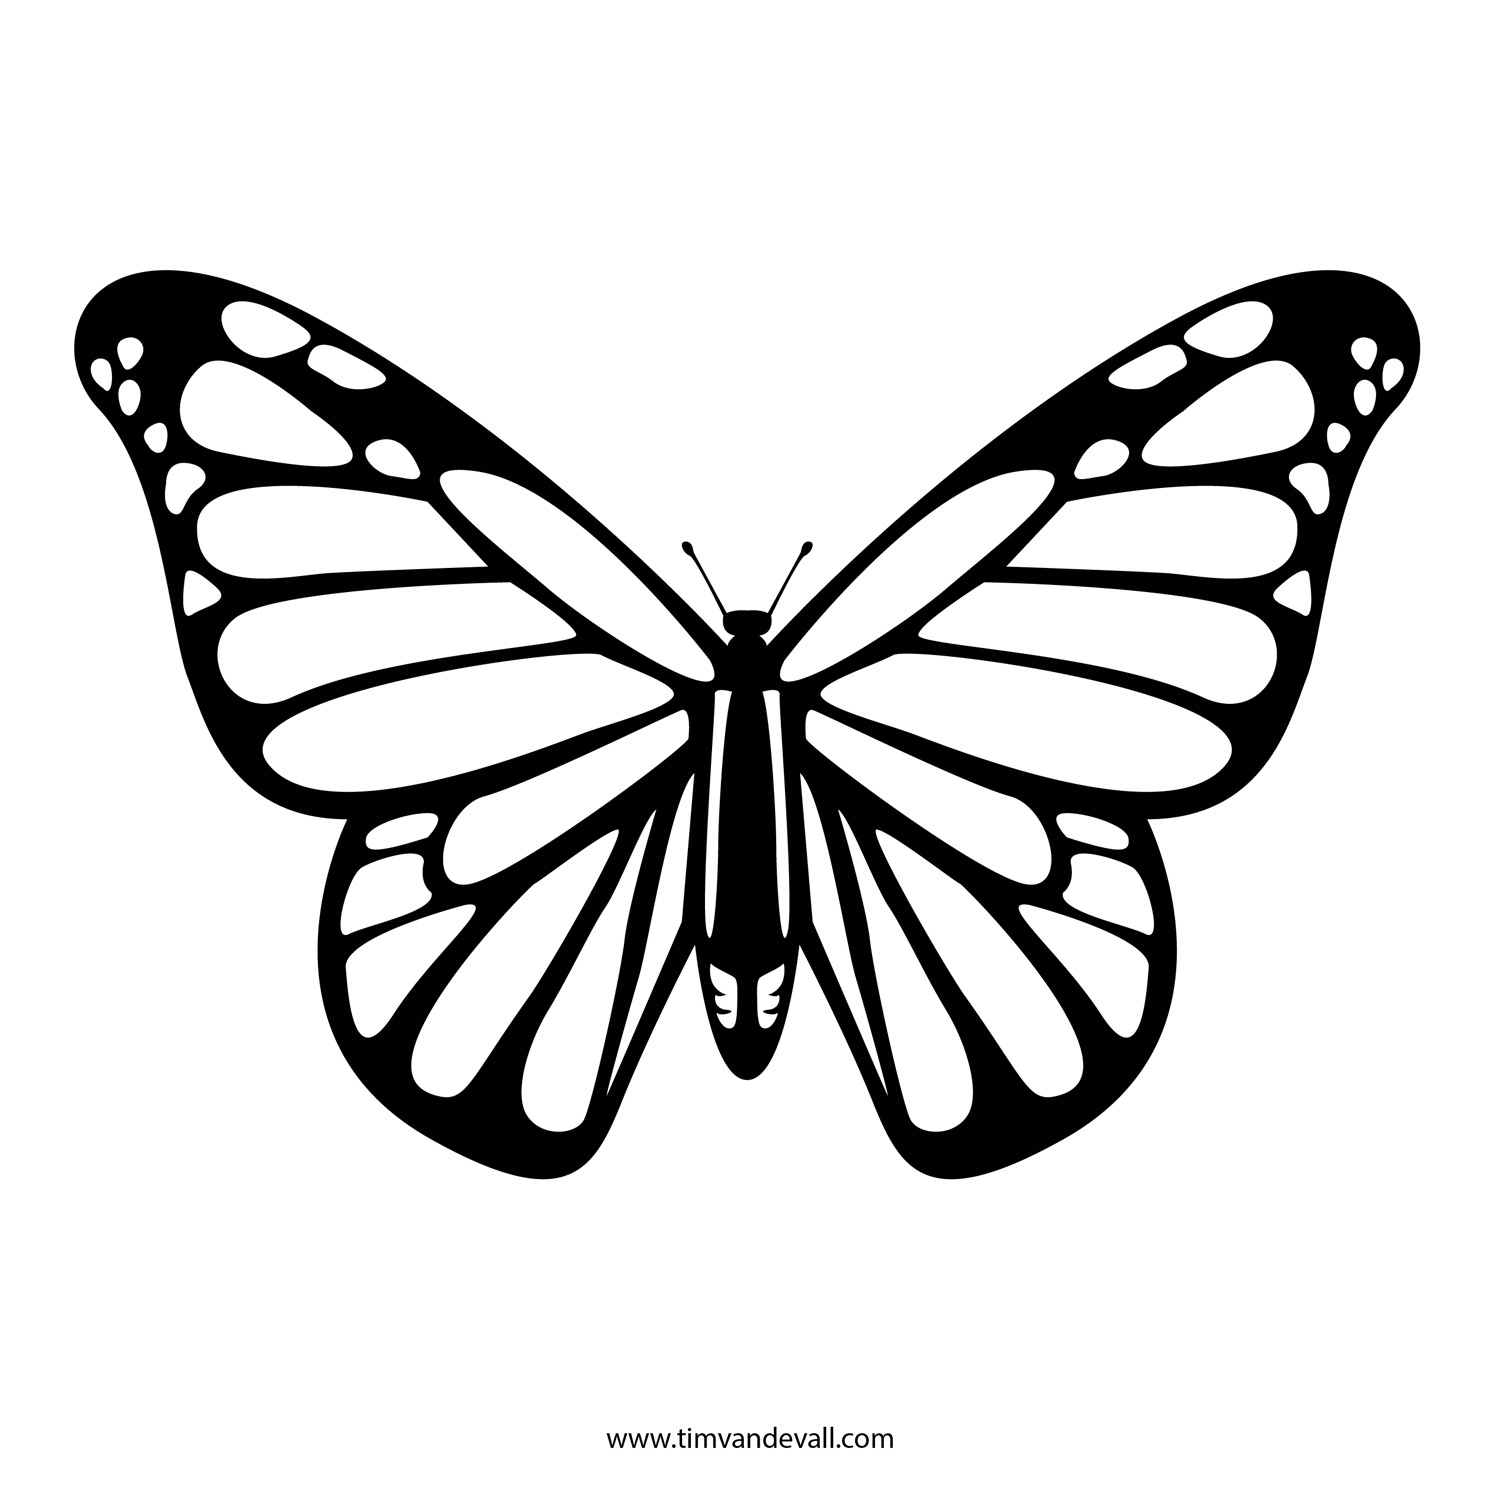 Free Monarch Butterfly Template, Download Free Clip Art, Free Clip - Free Printable Images Of Butterflies